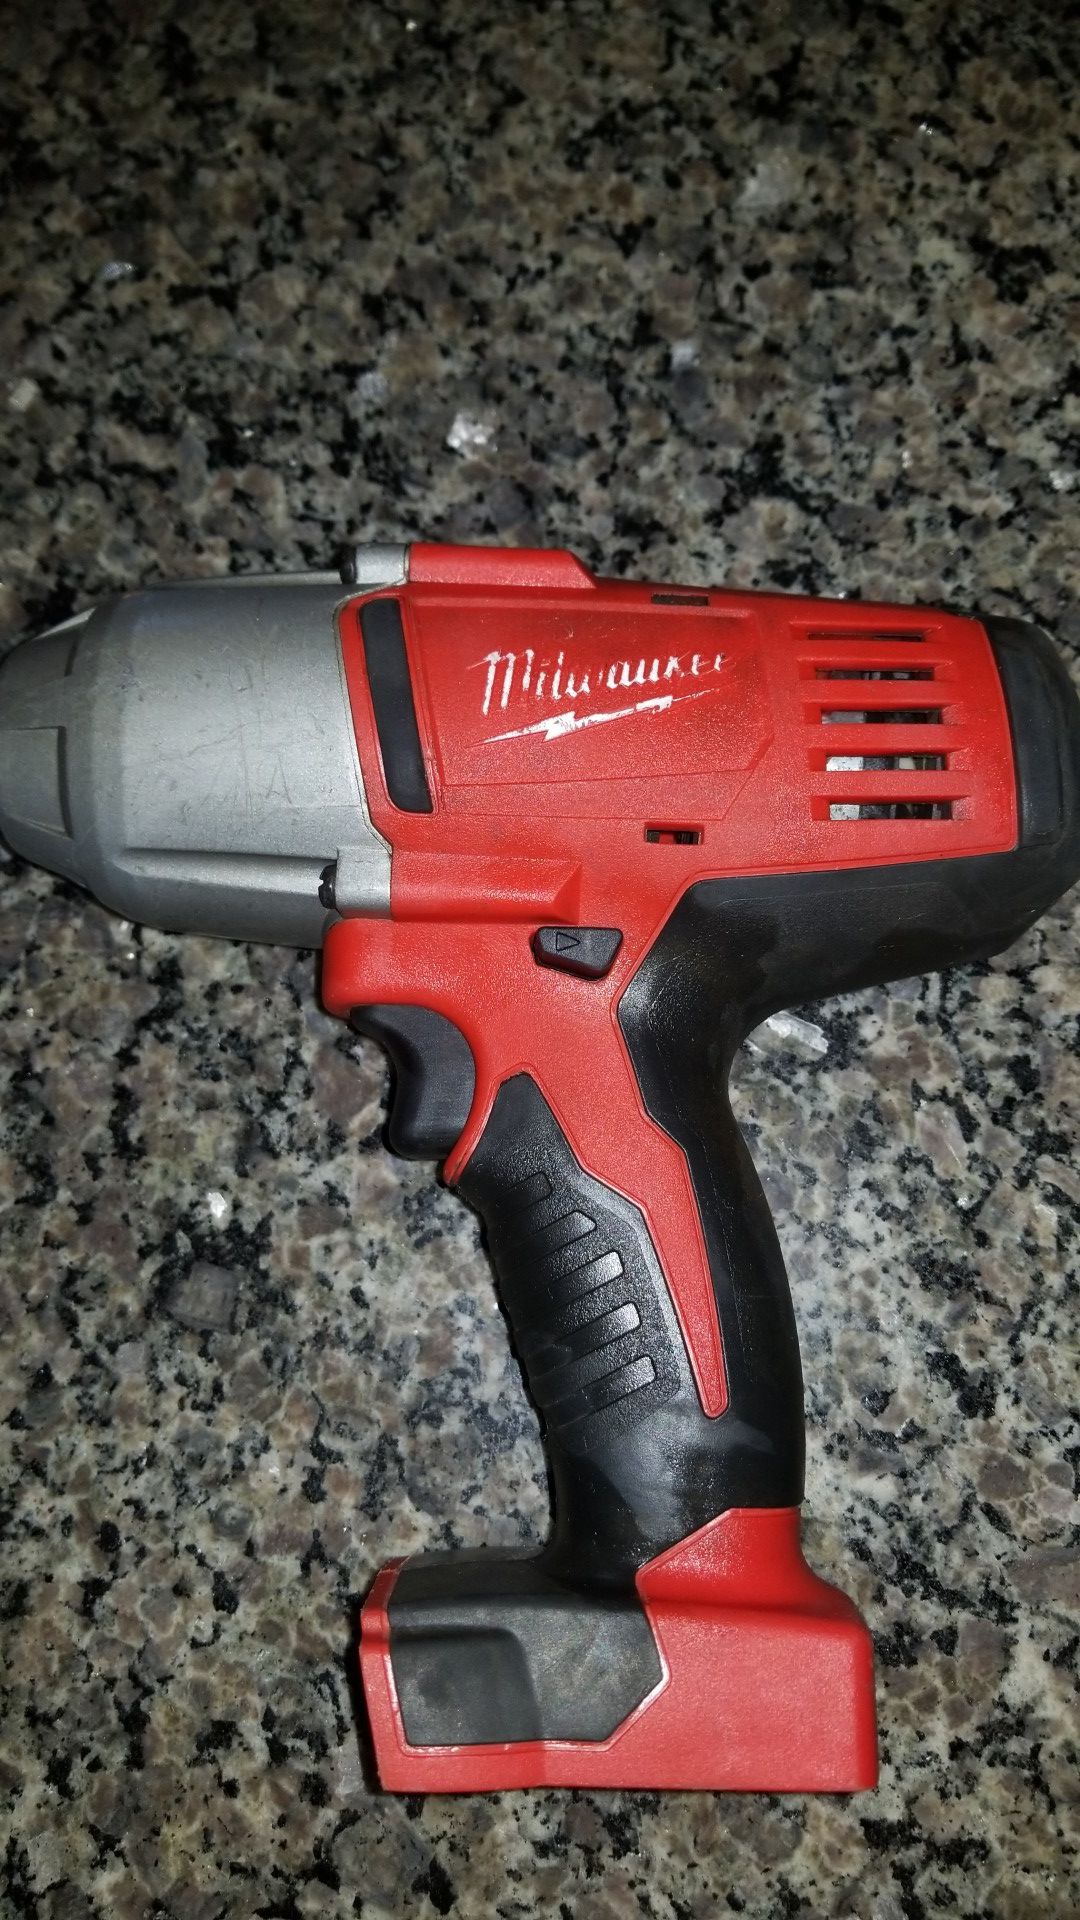 M18 Milwaukee 1/2" Impact Wrench (tool only)